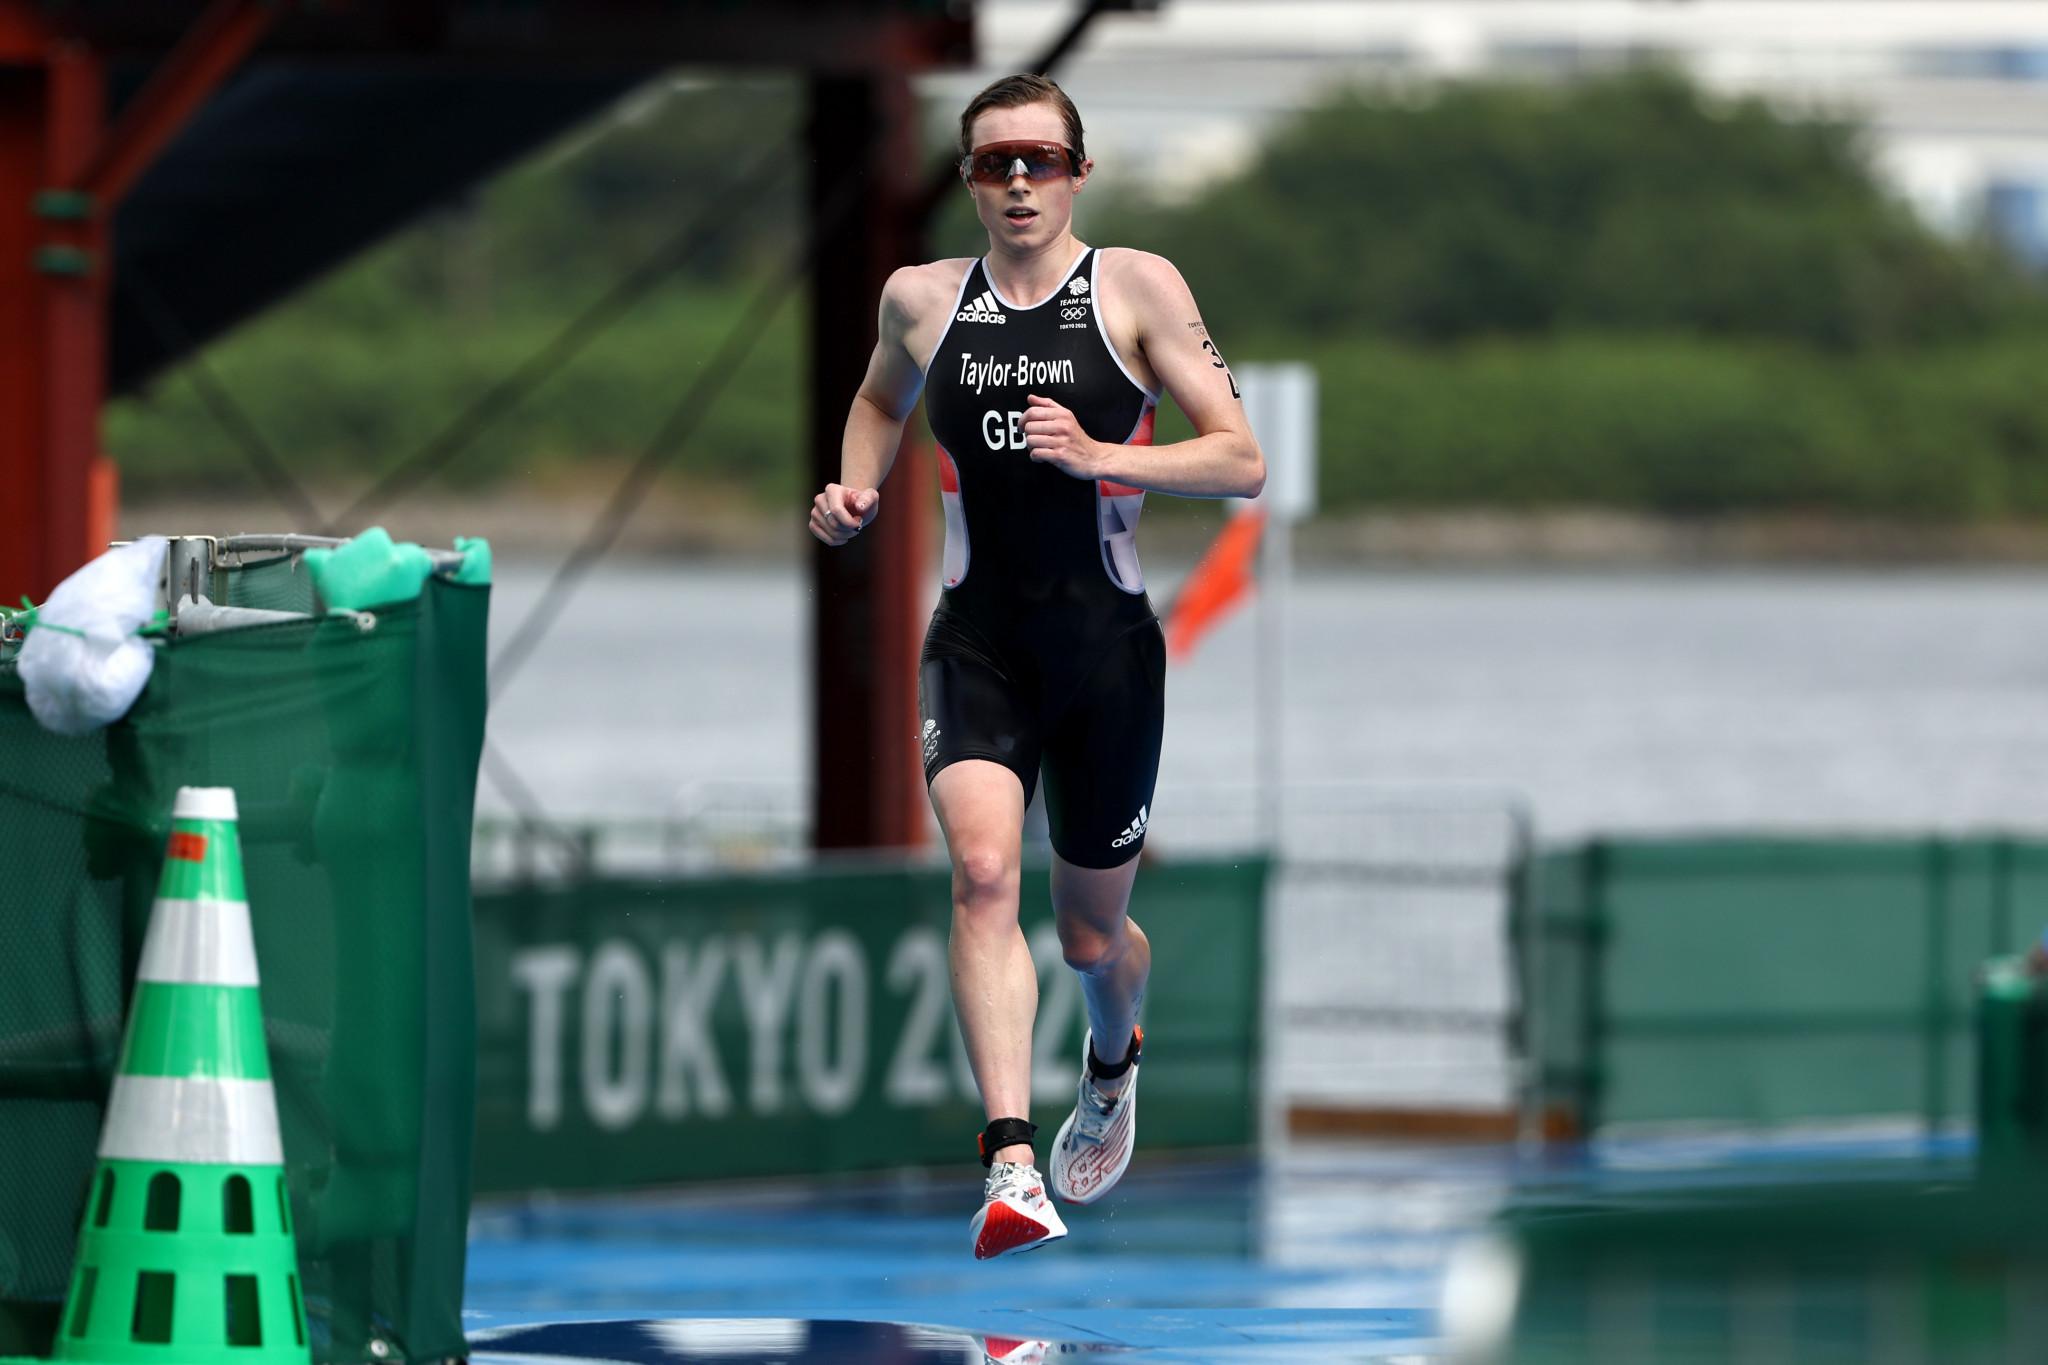 Taylor-Brown and Yee give Britain double success at World Triathlon Championship Series in Cagliari 